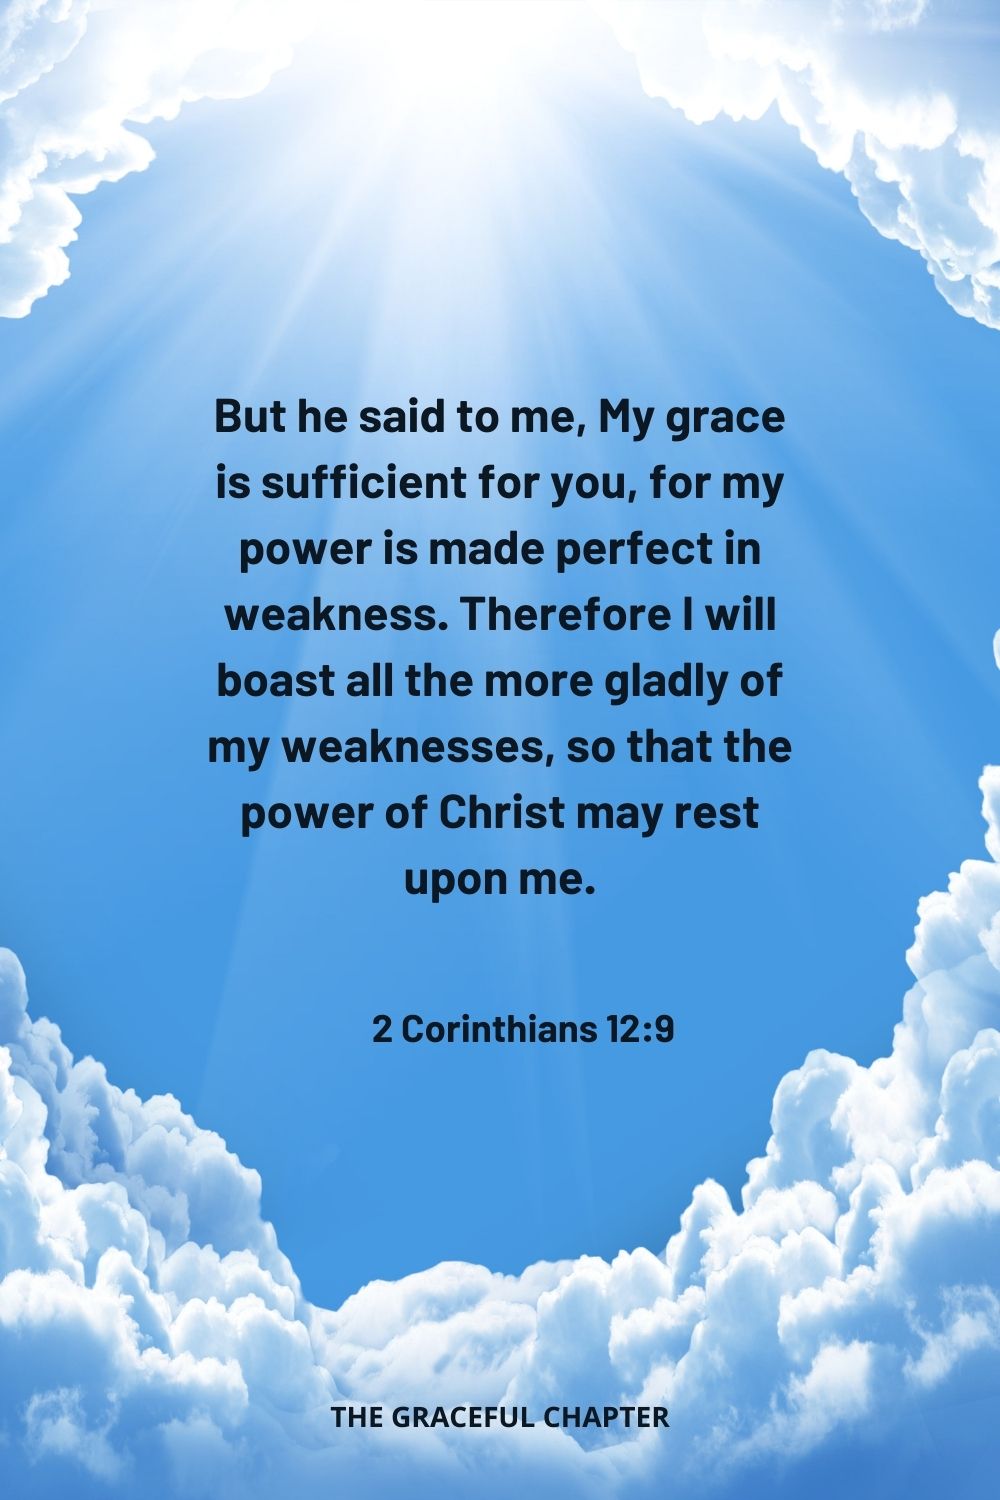 But he said to me, My grace is sufficient for you, for my power is made perfect in weakness. Therefore I will boast all the more gladly of my weaknesses, so that the power of Christ may rest upon me. 2 Corinthians 12:9